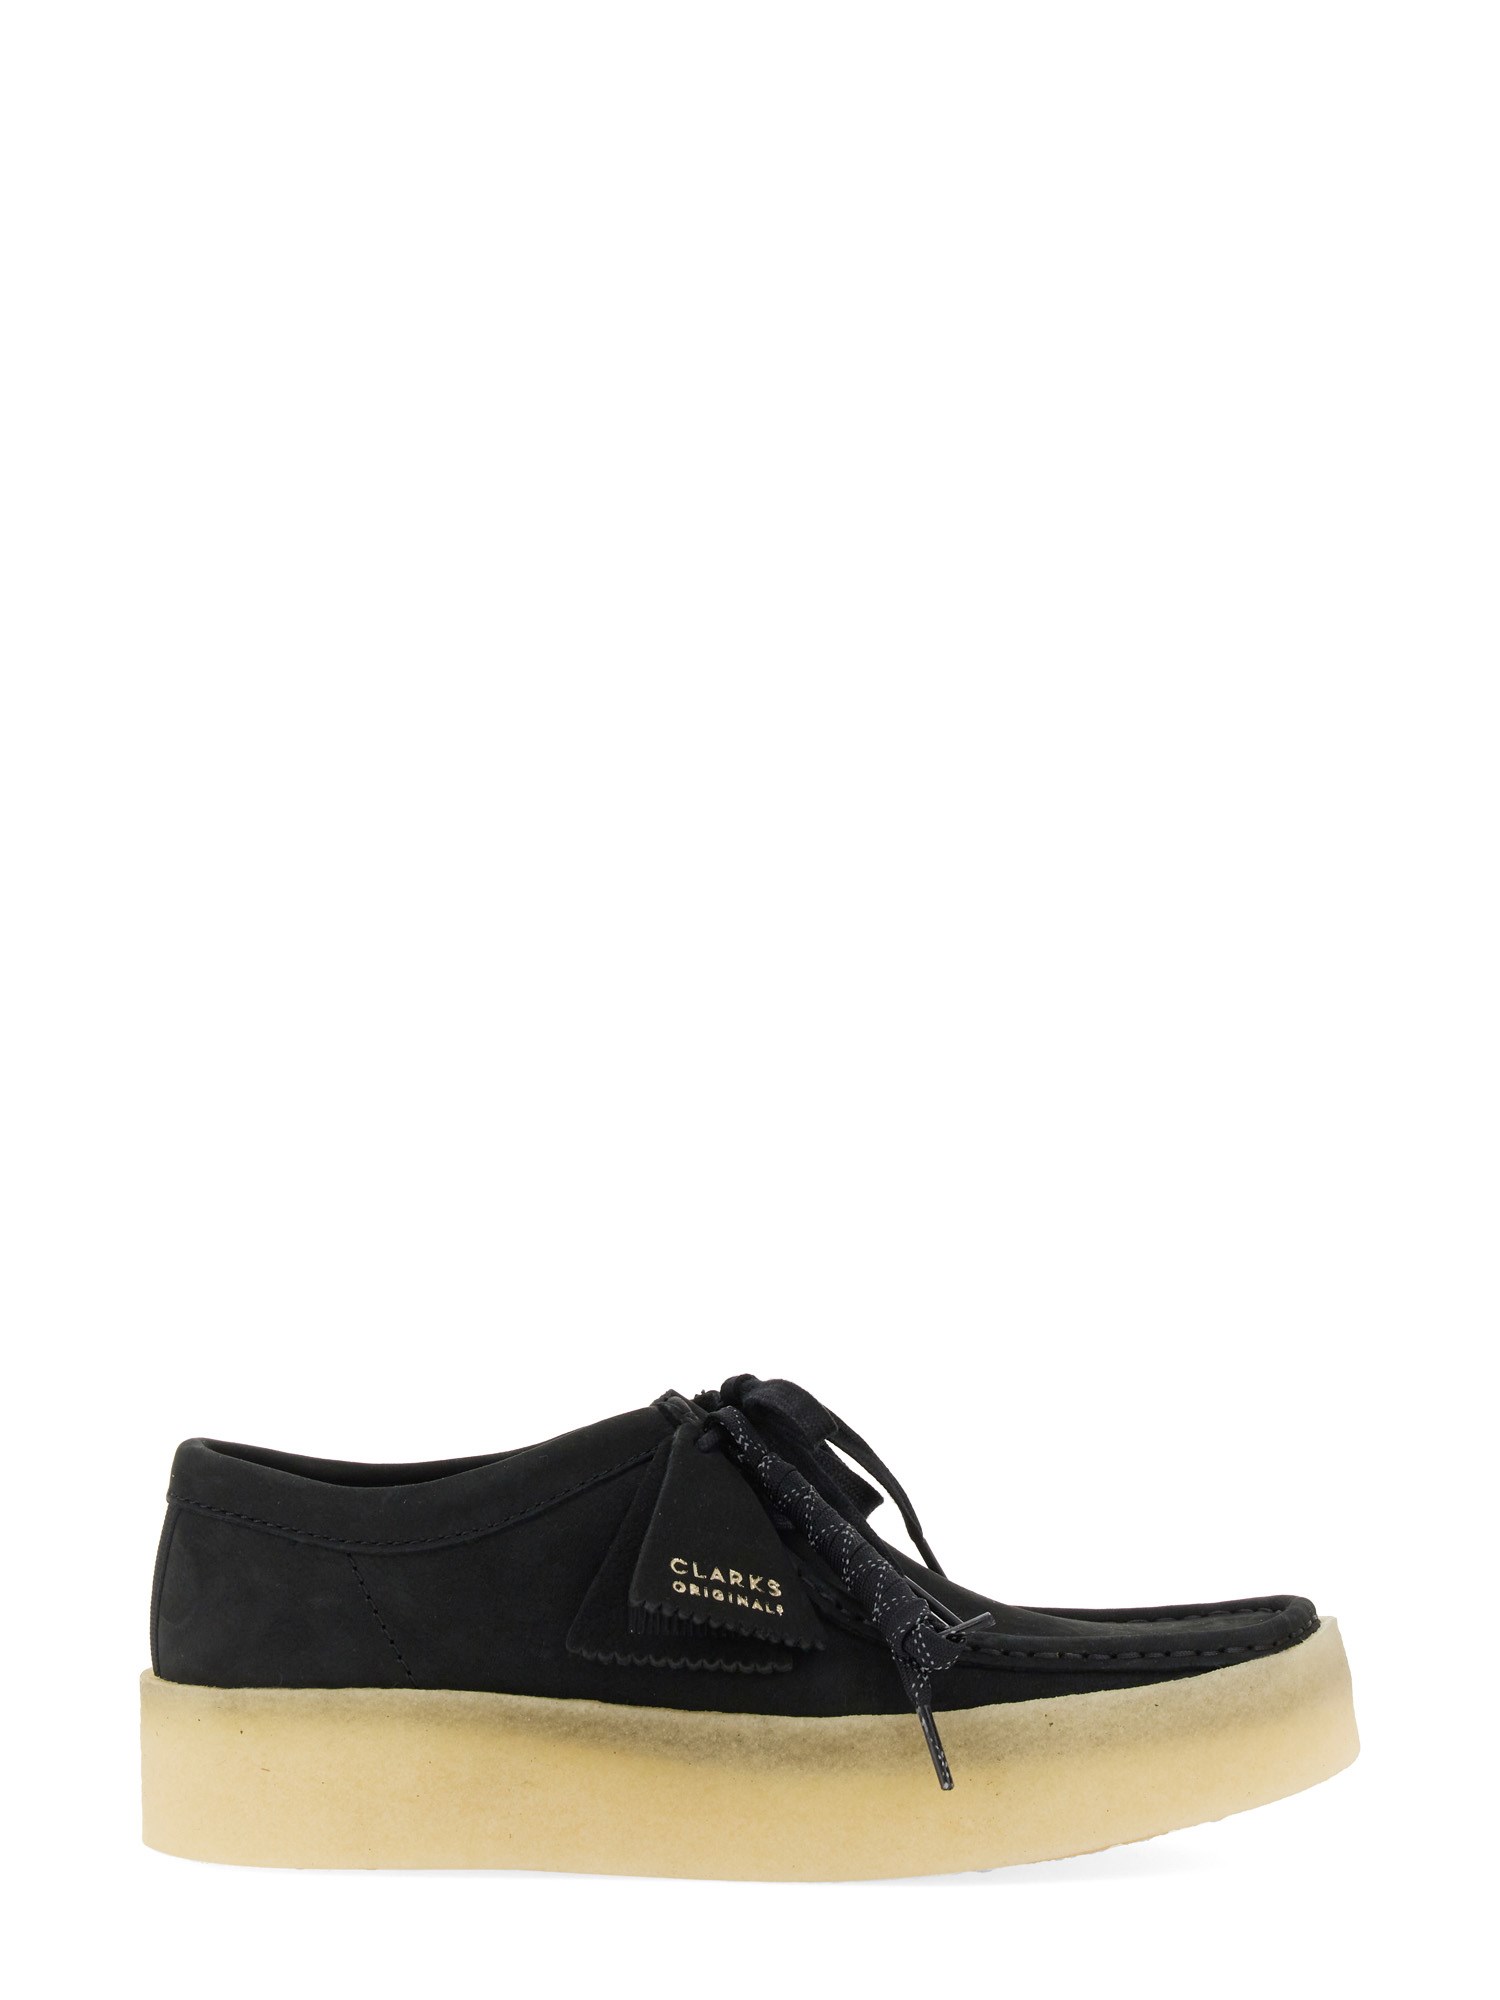 clarks moccasin wallabee cup